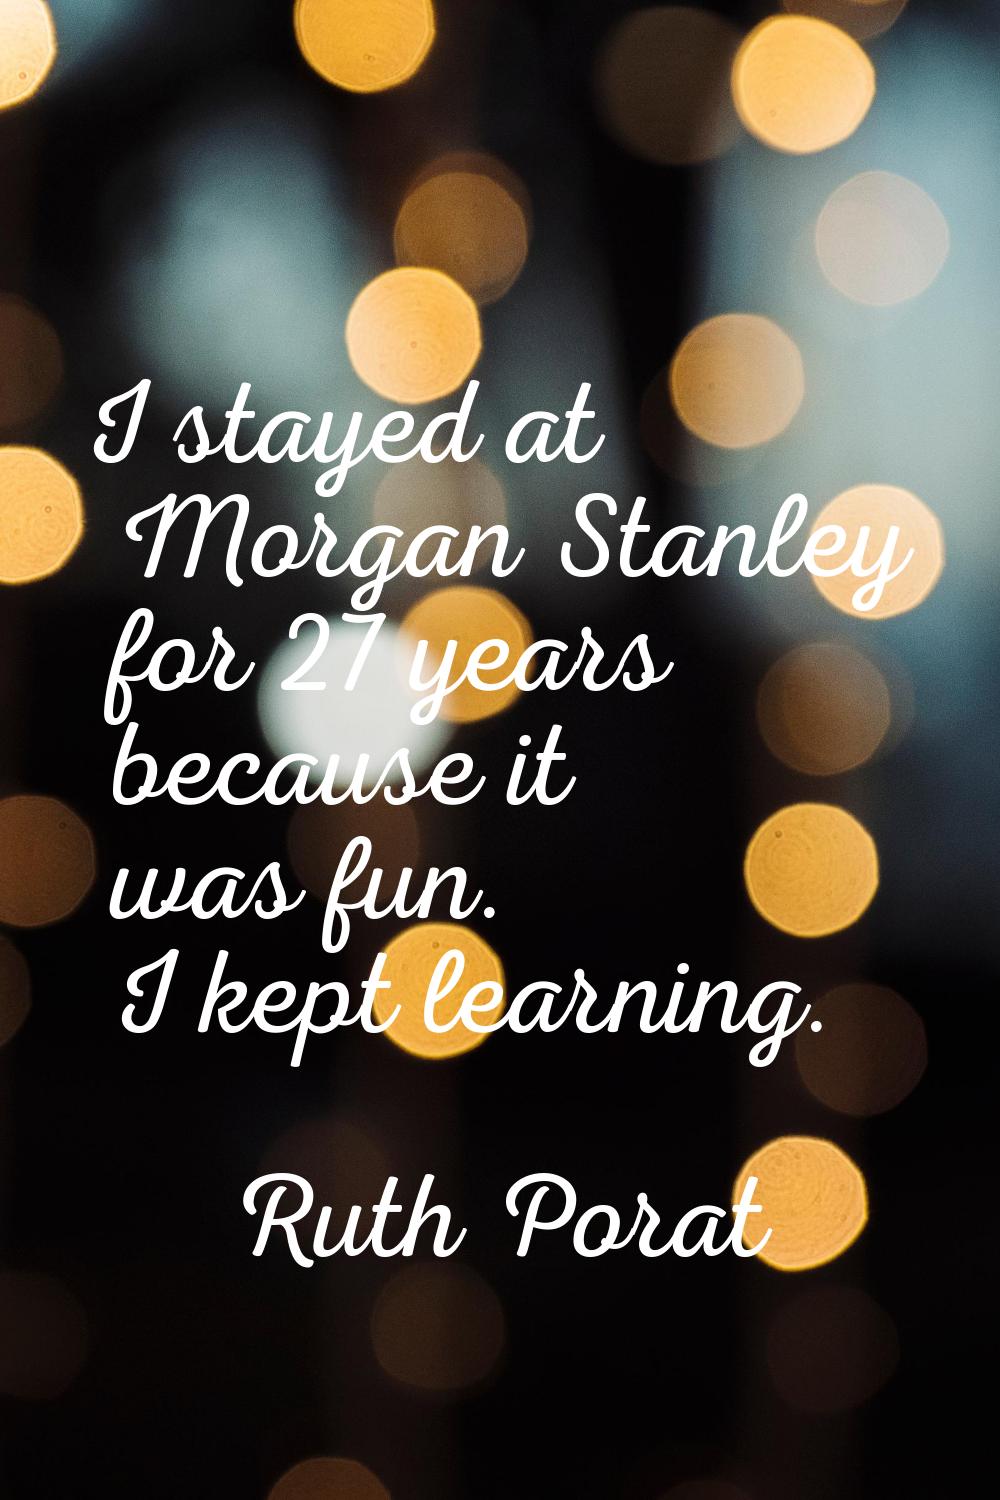 I stayed at Morgan Stanley for 27 years because it was fun. I kept learning.